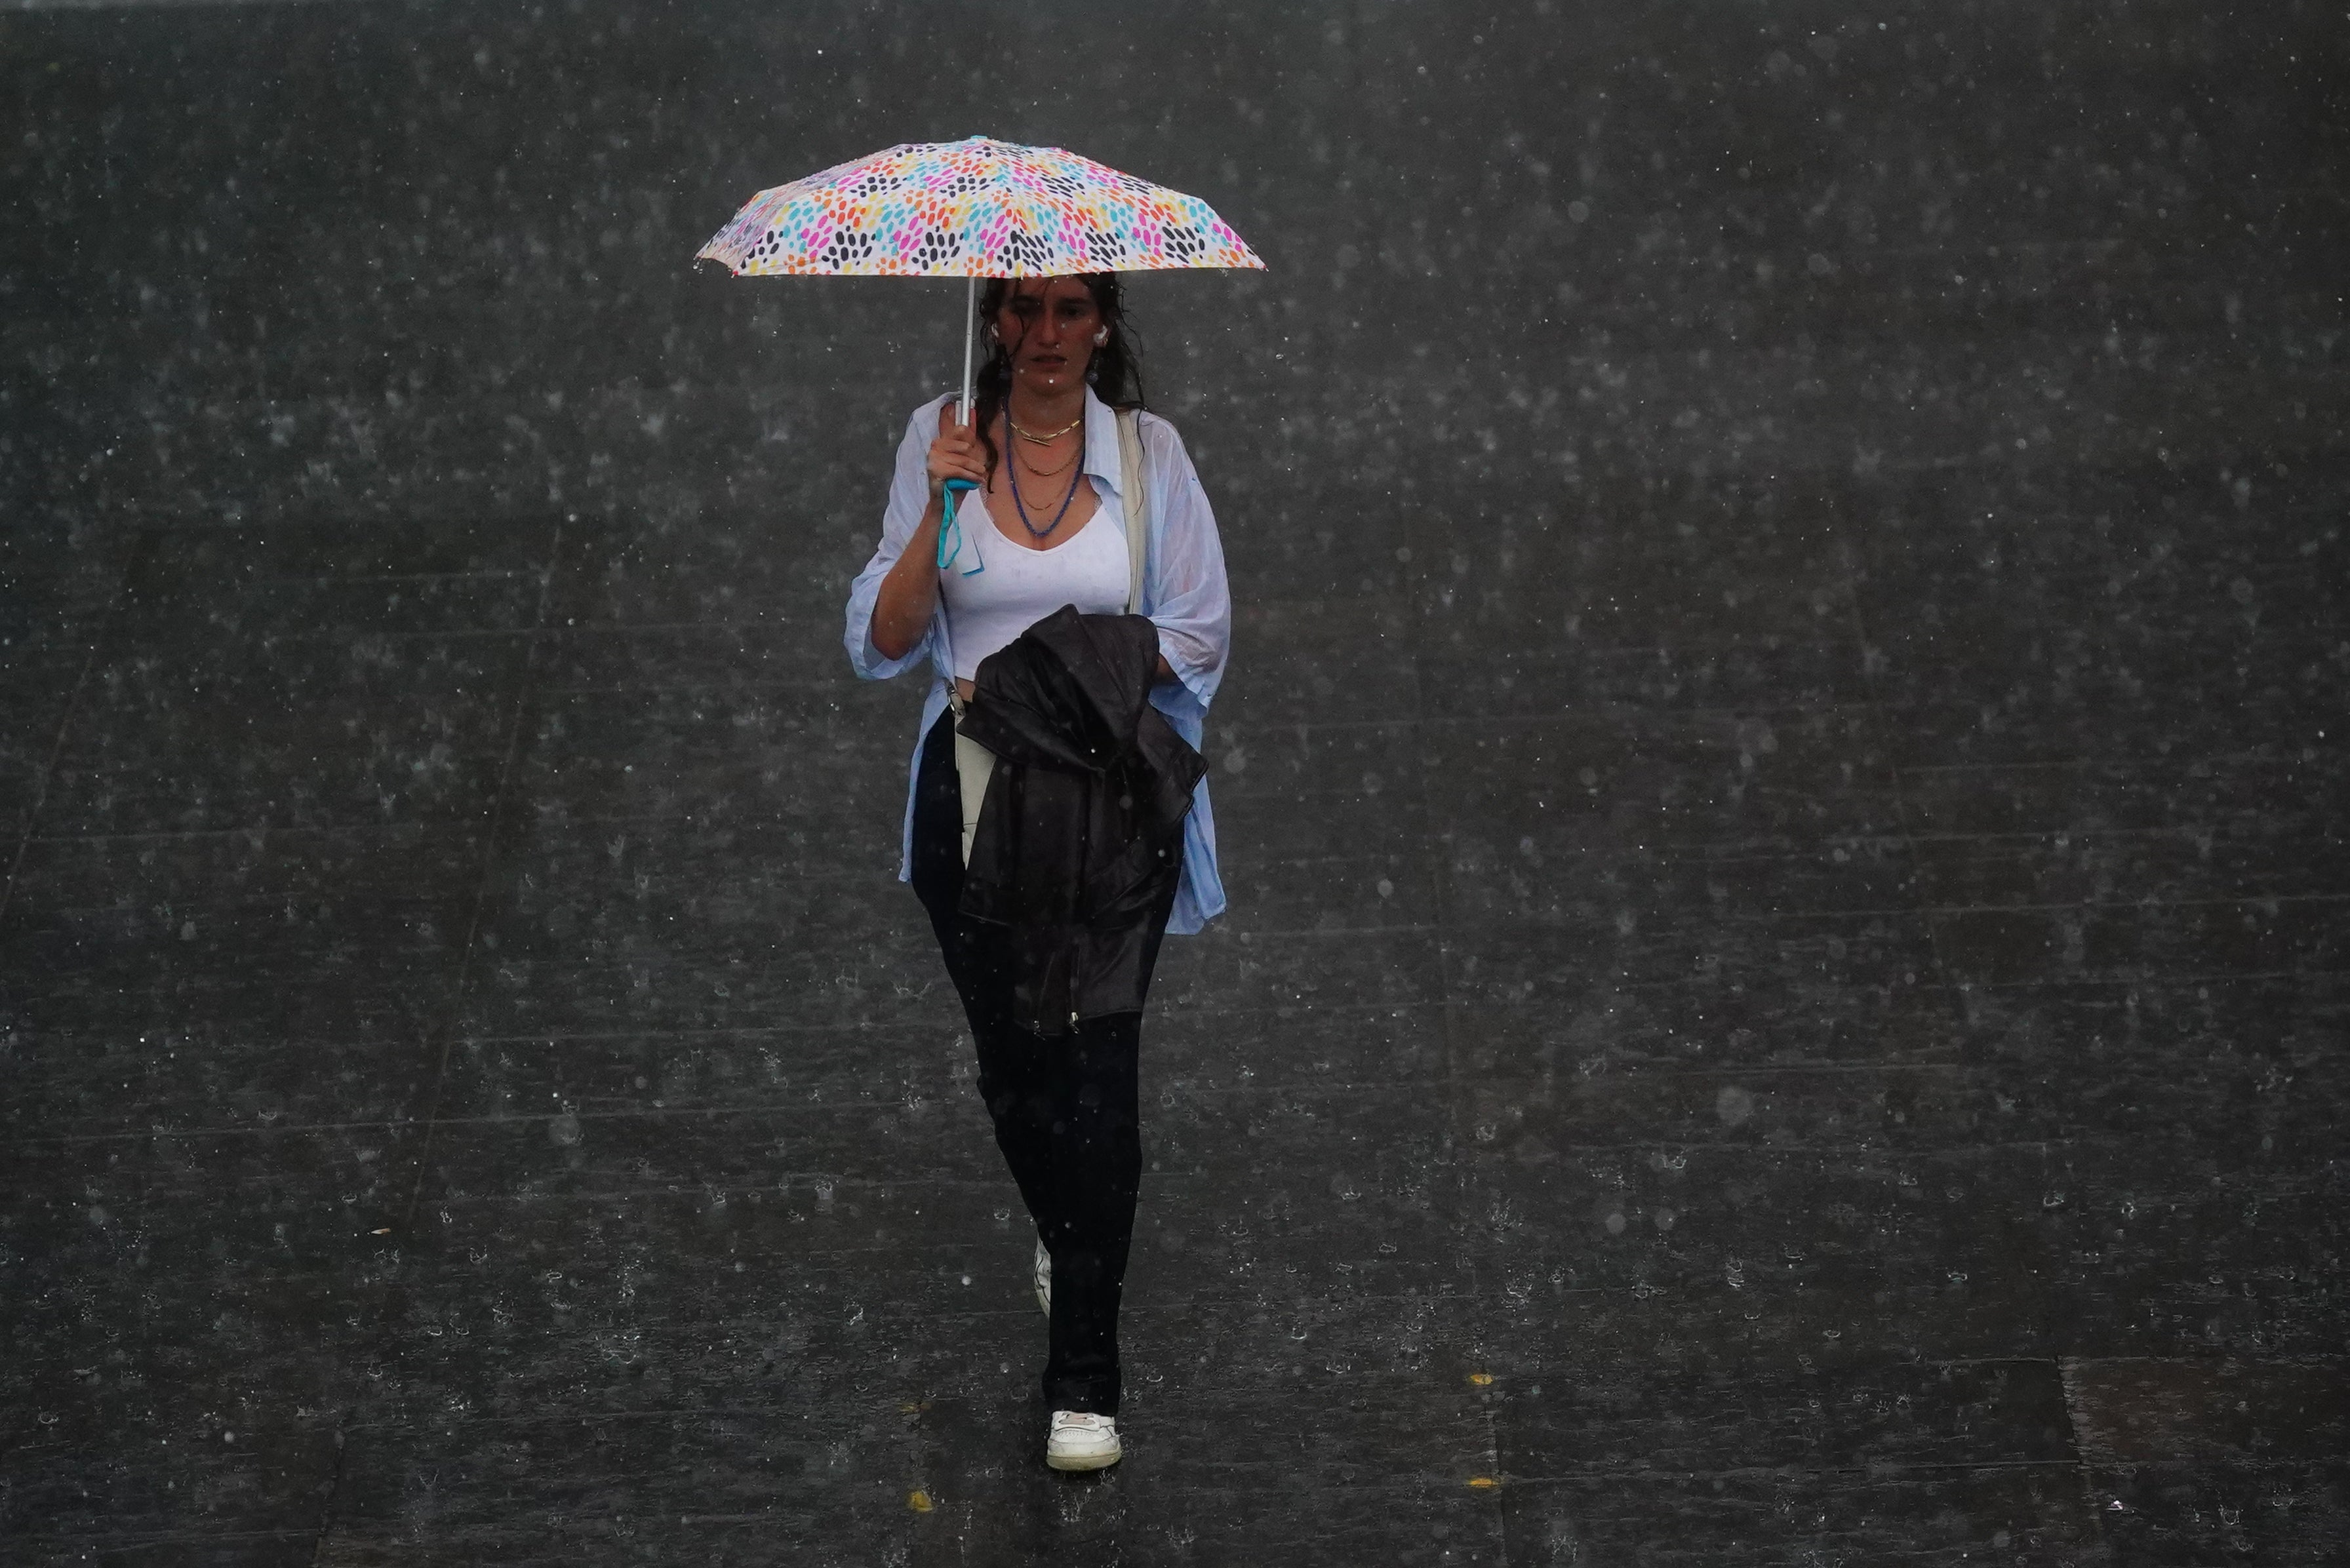 Weather warning for rain in place as downpours set to continue (Victoria Jones/PA)